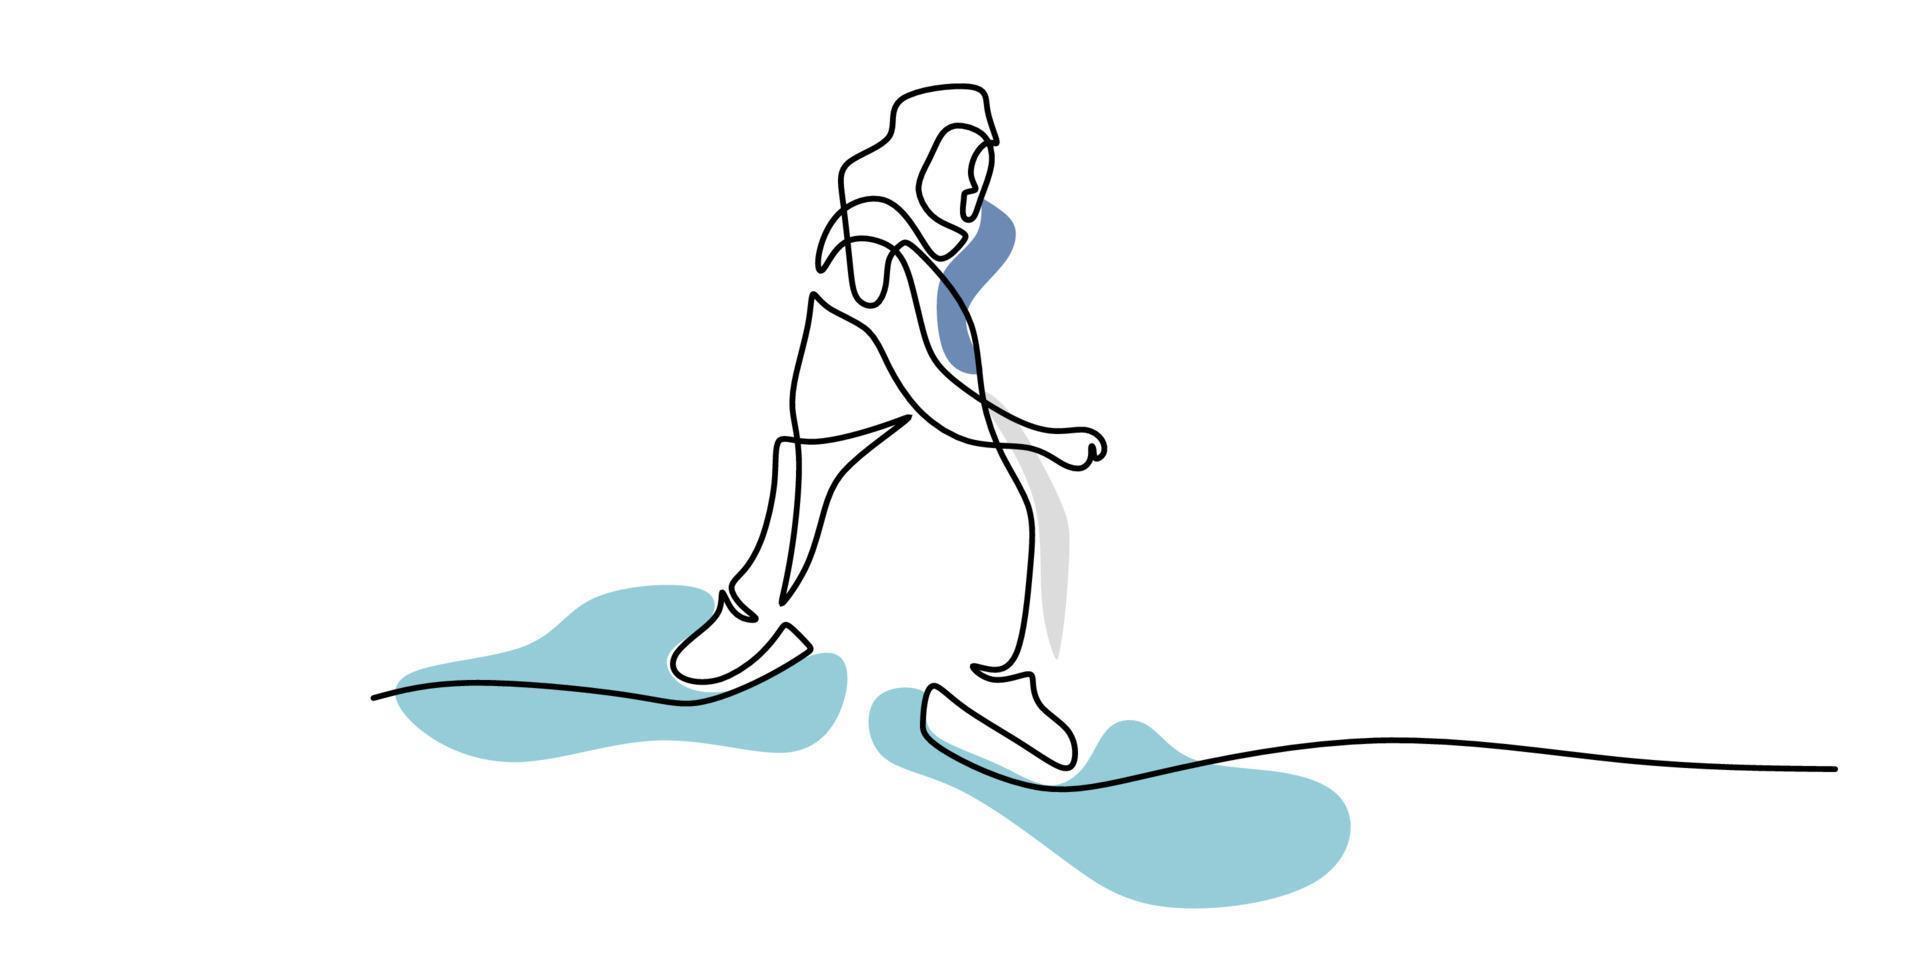 Continuous one single line of teenage girl playing ice skating vector